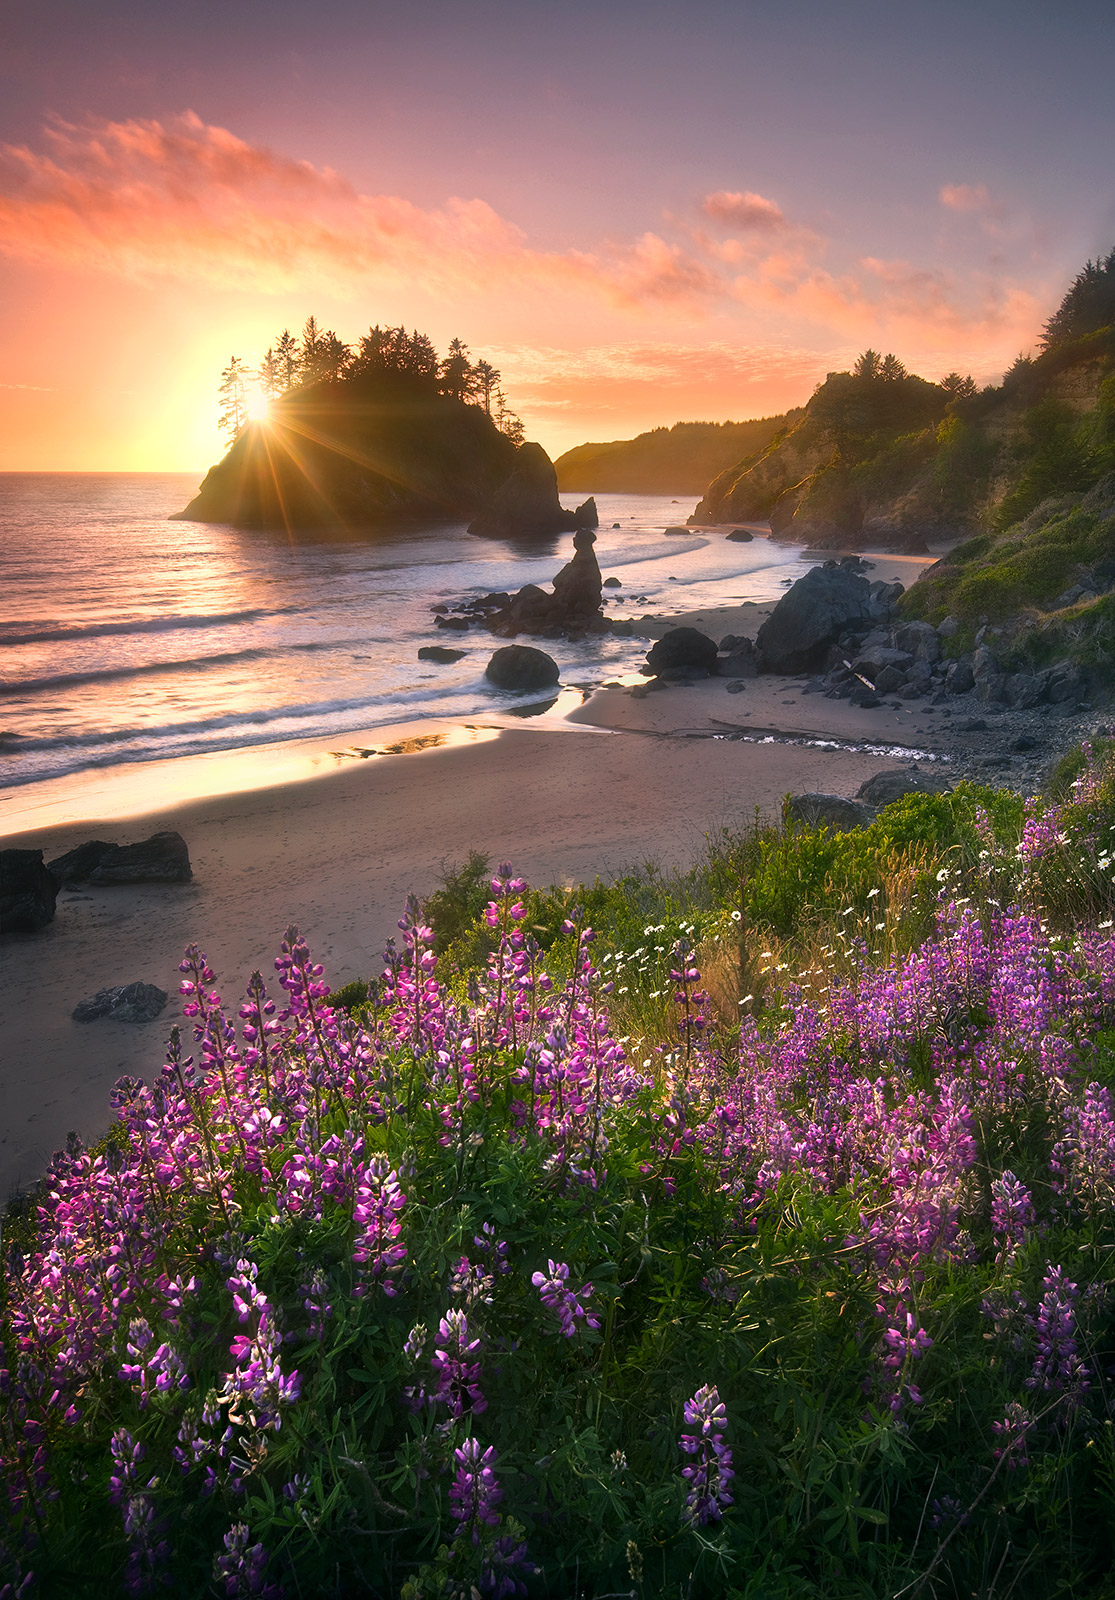 Lupine flowers glow in the last light of sunset overlooking the sea stacks and sandy beaches of the Northern California coast...